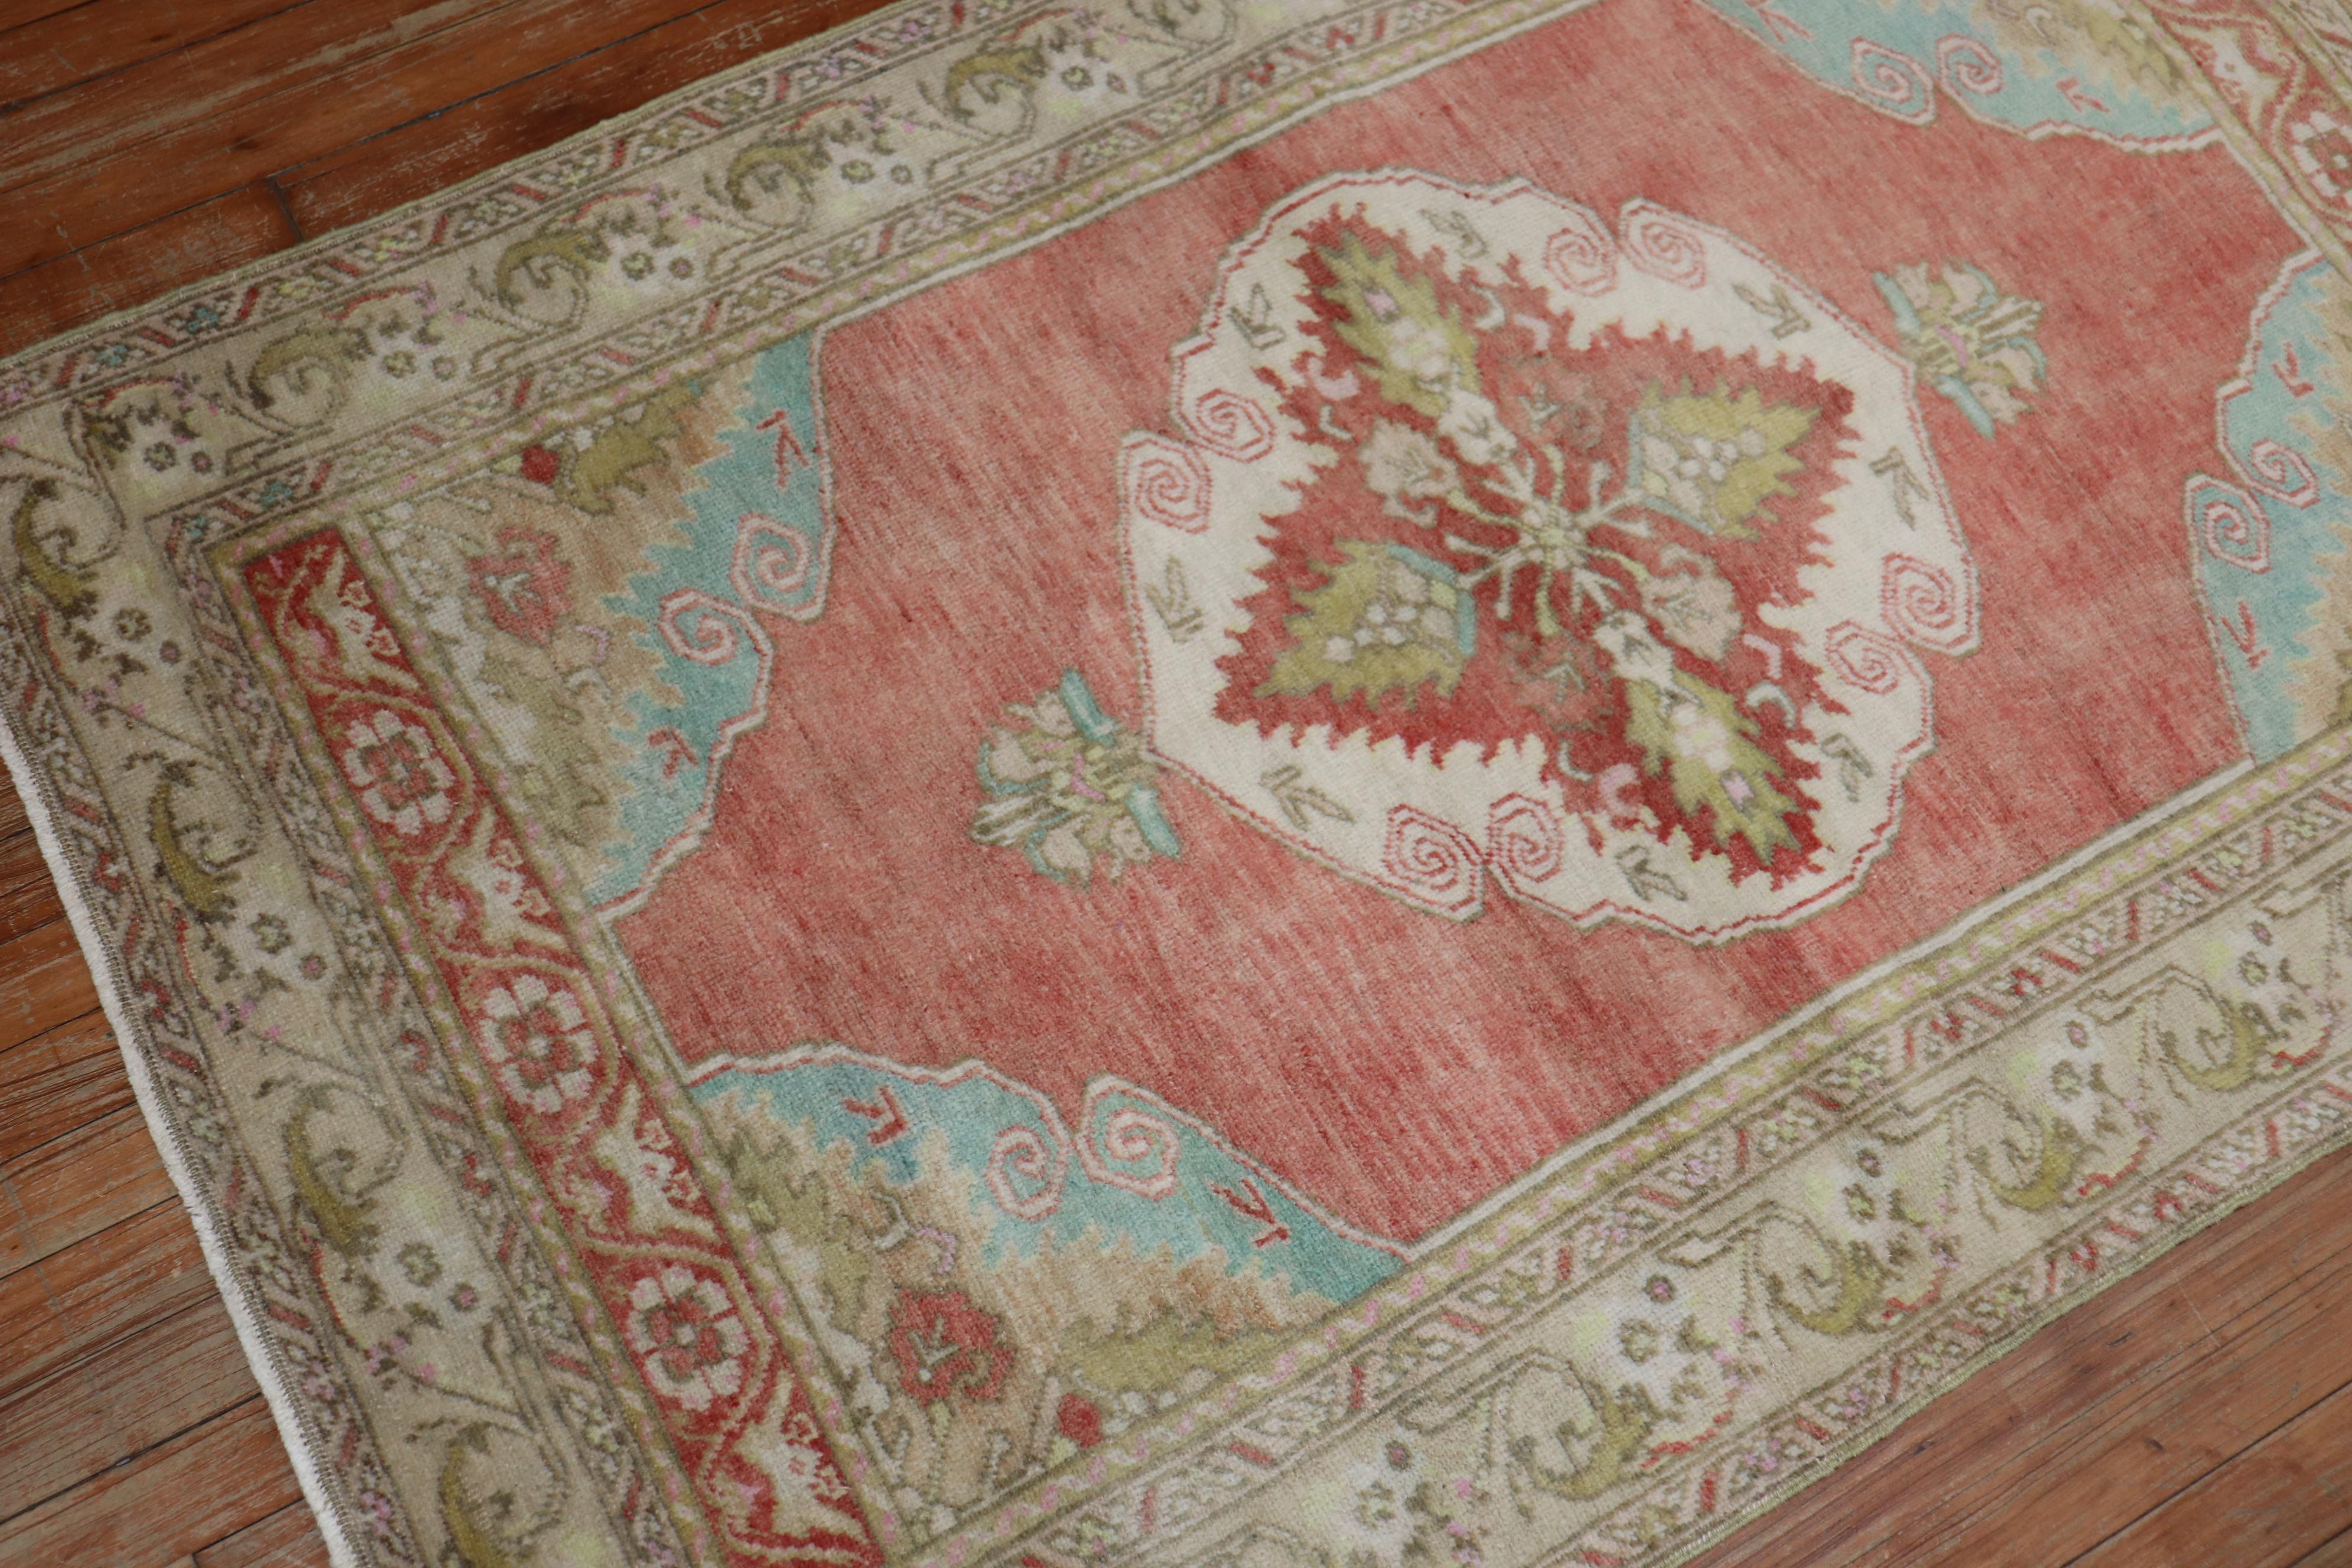 One of a kind vintage Turkish Throw rug from the mid-20th century with a traditional medallion and border design mainly in soft red, powder blue and ivory.

Measures: 3'5'' x 5'6''.